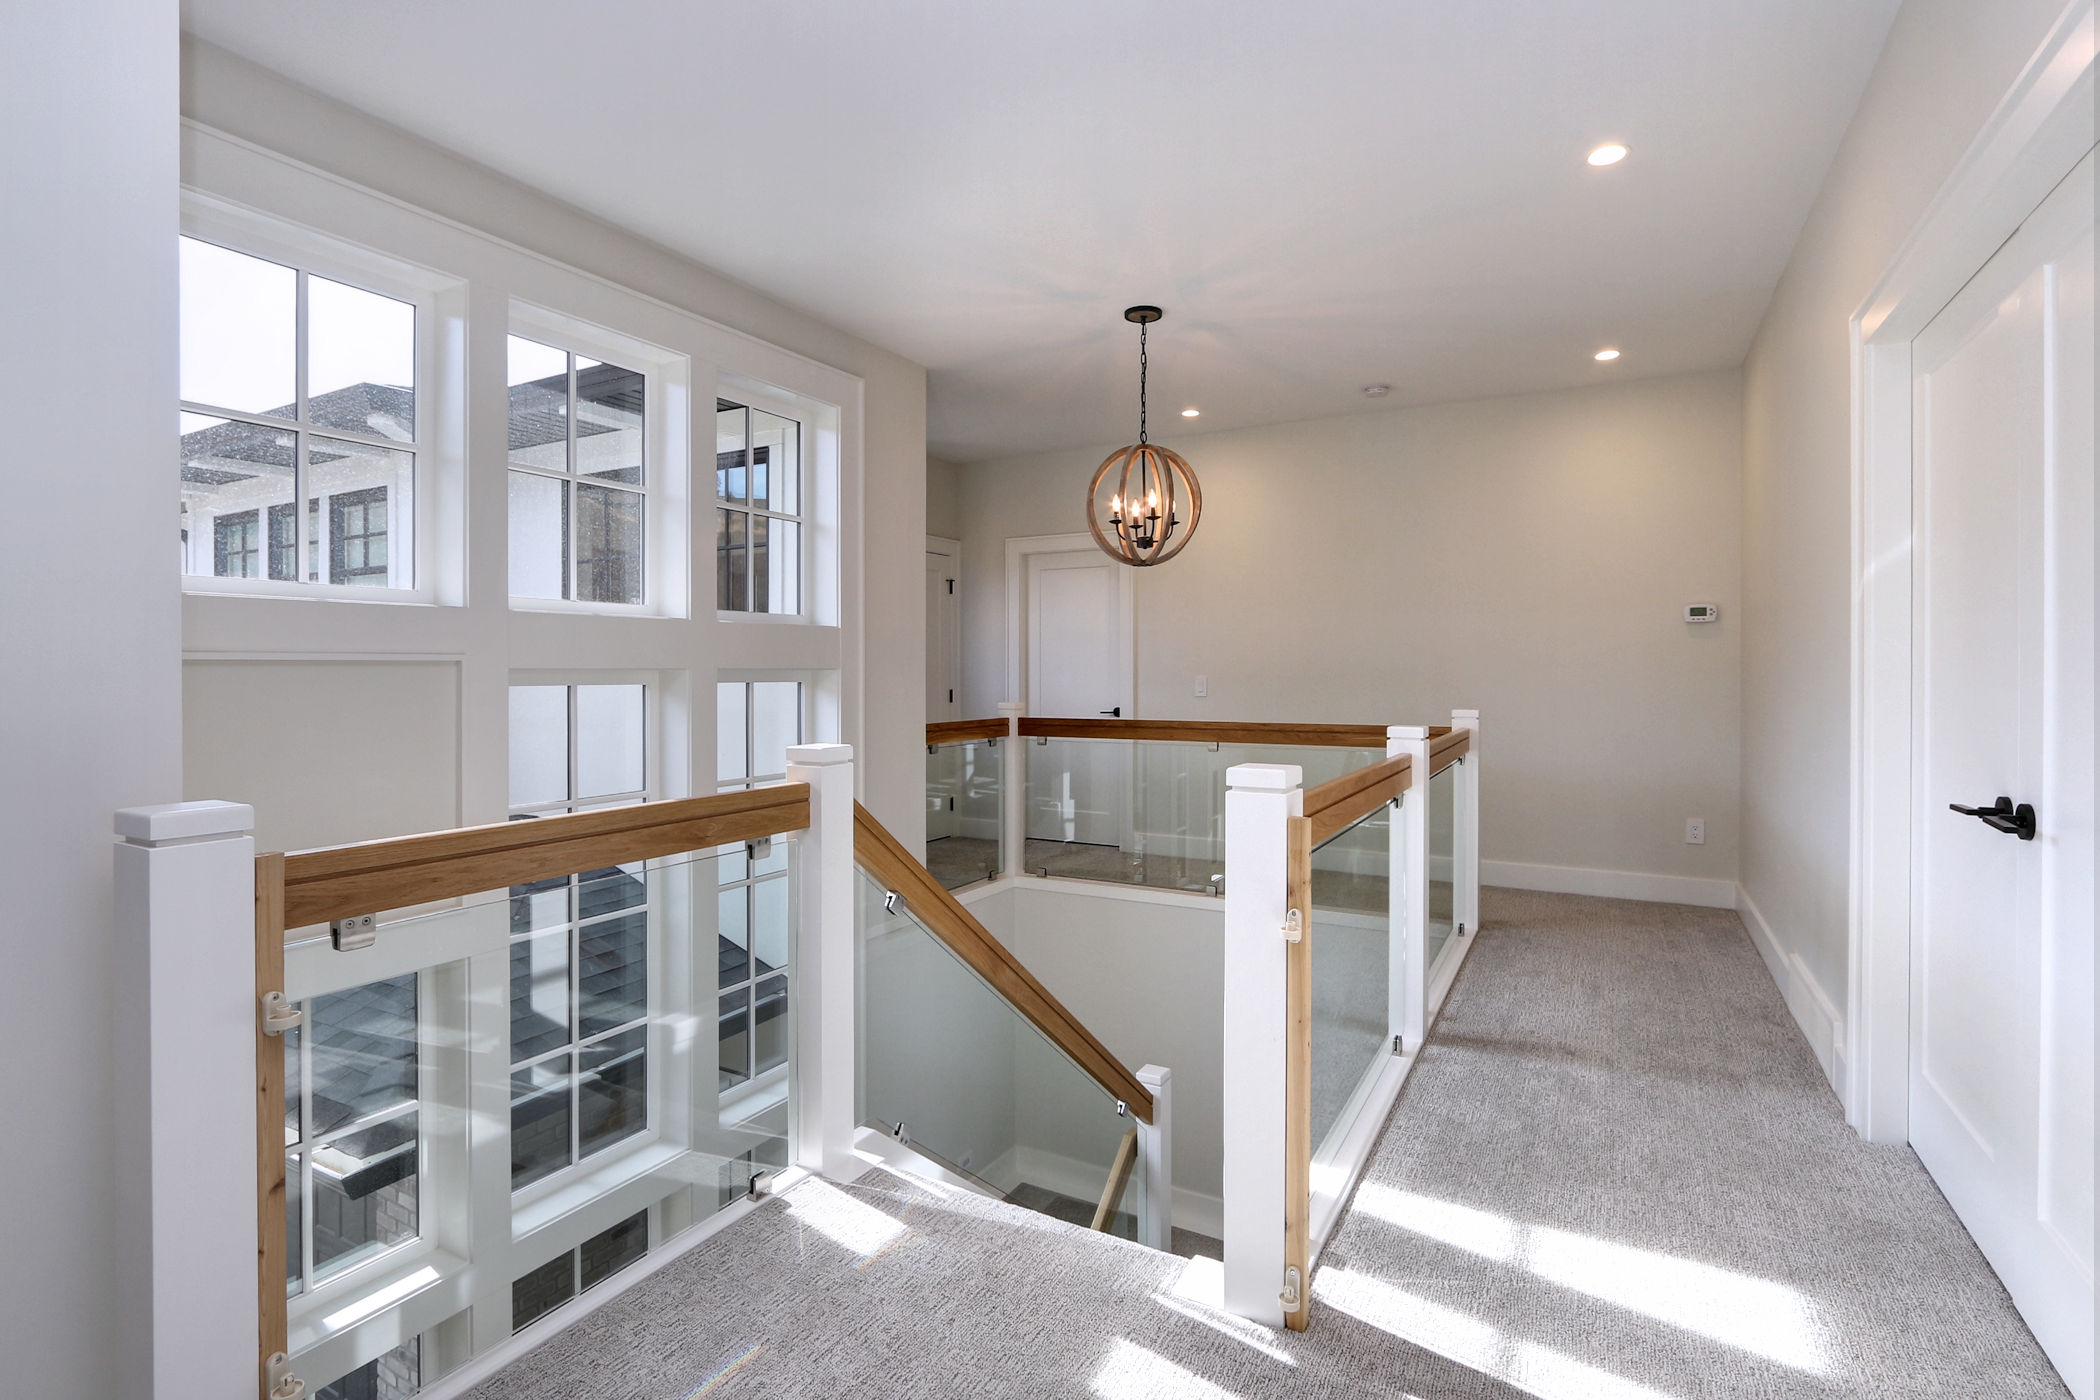 Third floor stairs and platform build by Stark Homes at 470 Rockview Lane